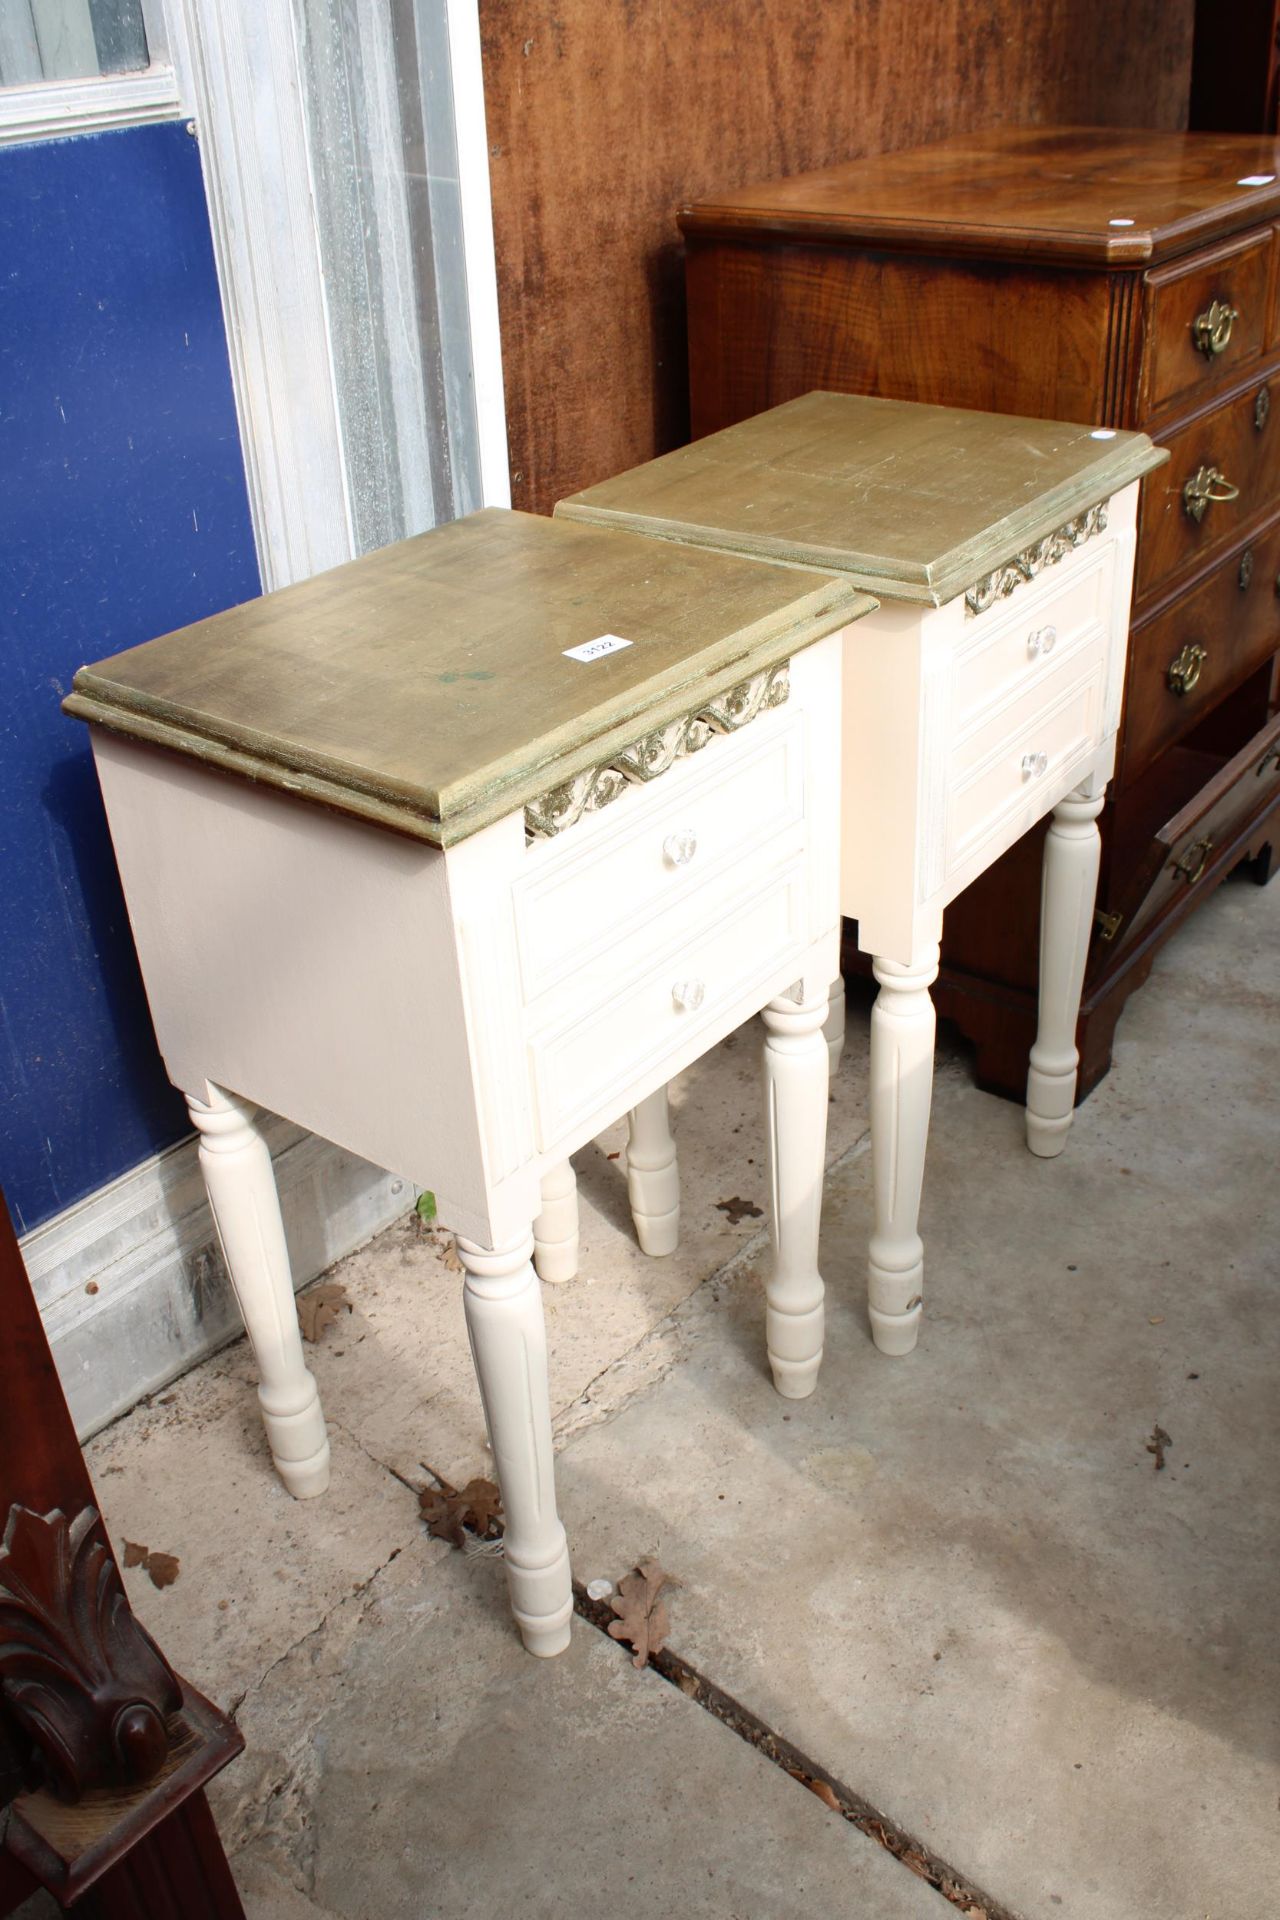 A PAIR OF CREAM AND GOLD PAINTED BEDSIDE TABLES - Image 2 of 2